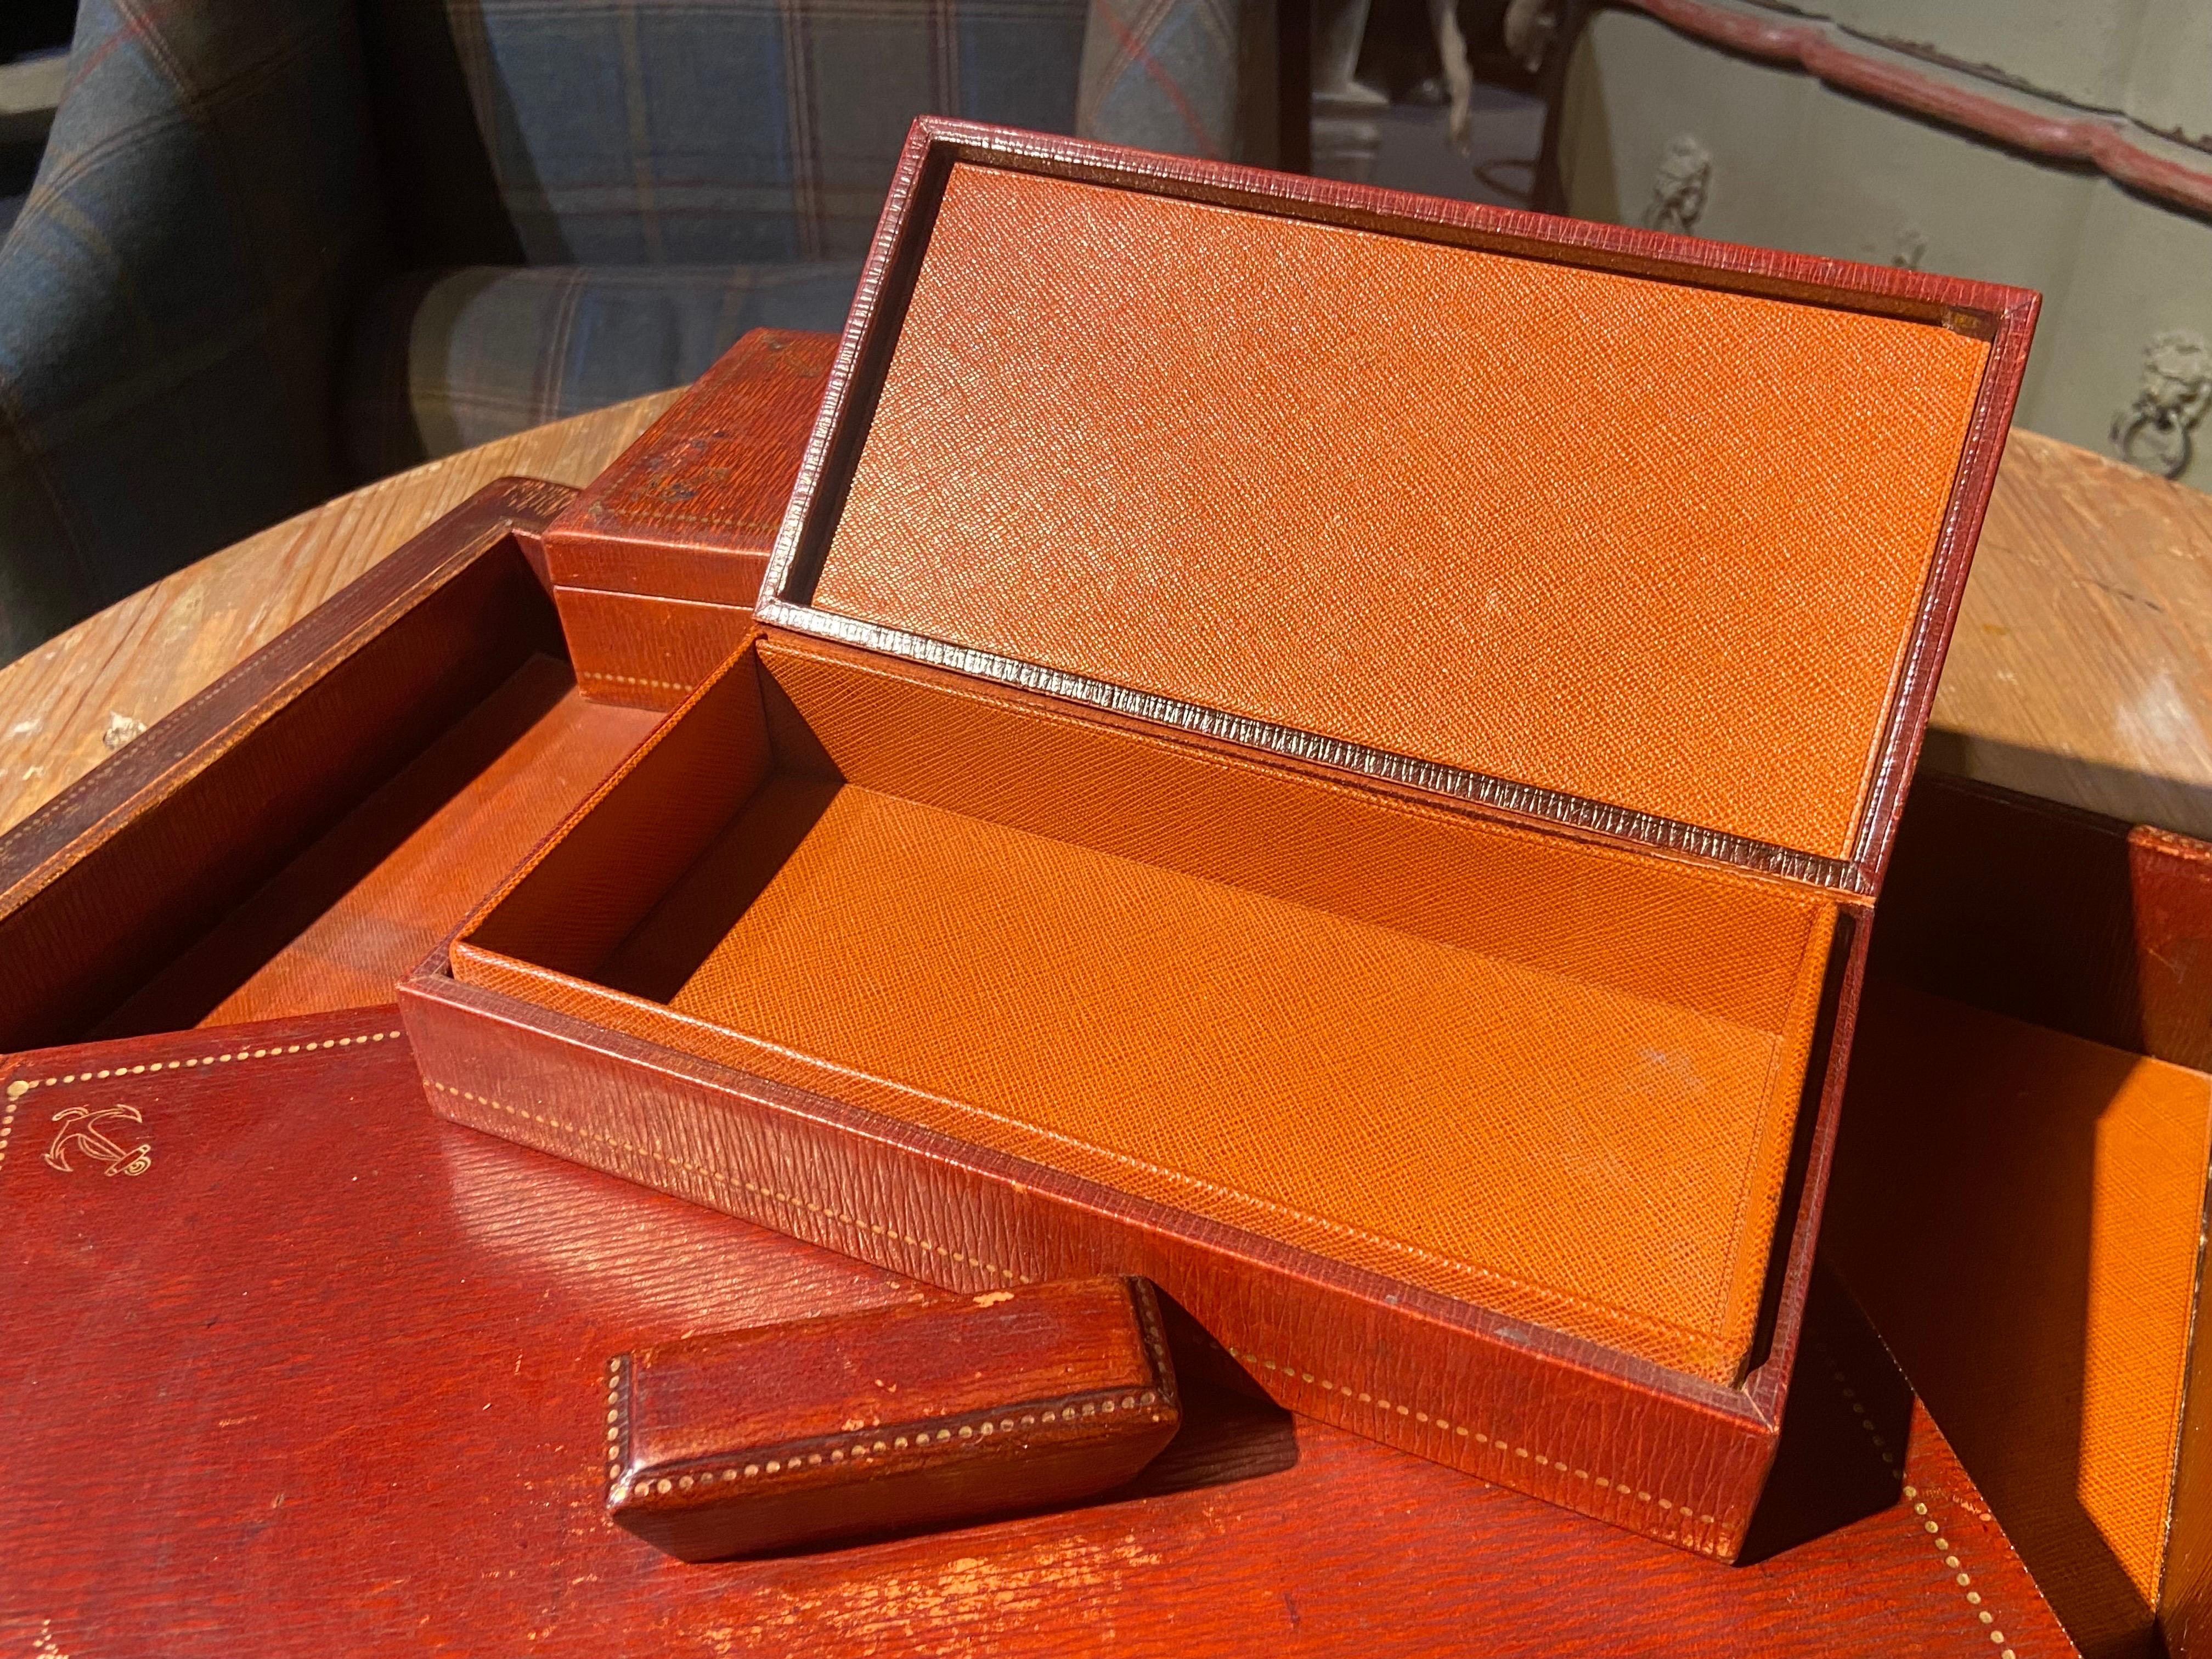 French leather desk set of five pieces all wrapped in genuine leather in special cognac colour. The set contains a large desk pad, a small open paper tray, a bigger paper box with orange leather interior and a cover and two small leather boxes with